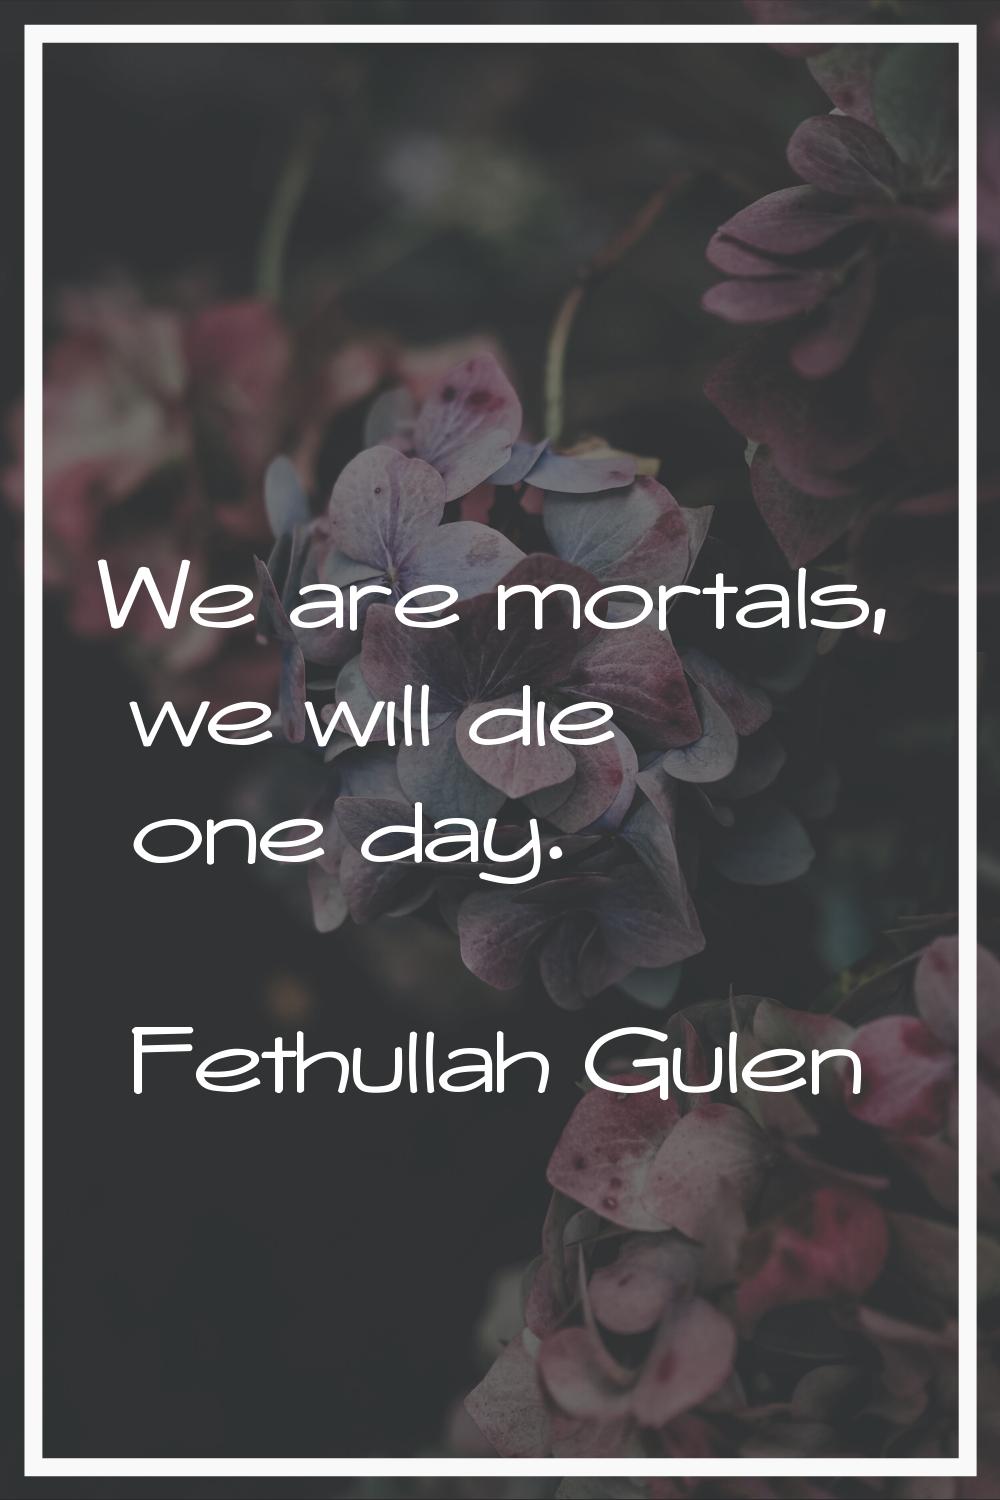 We are mortals, we will die one day.